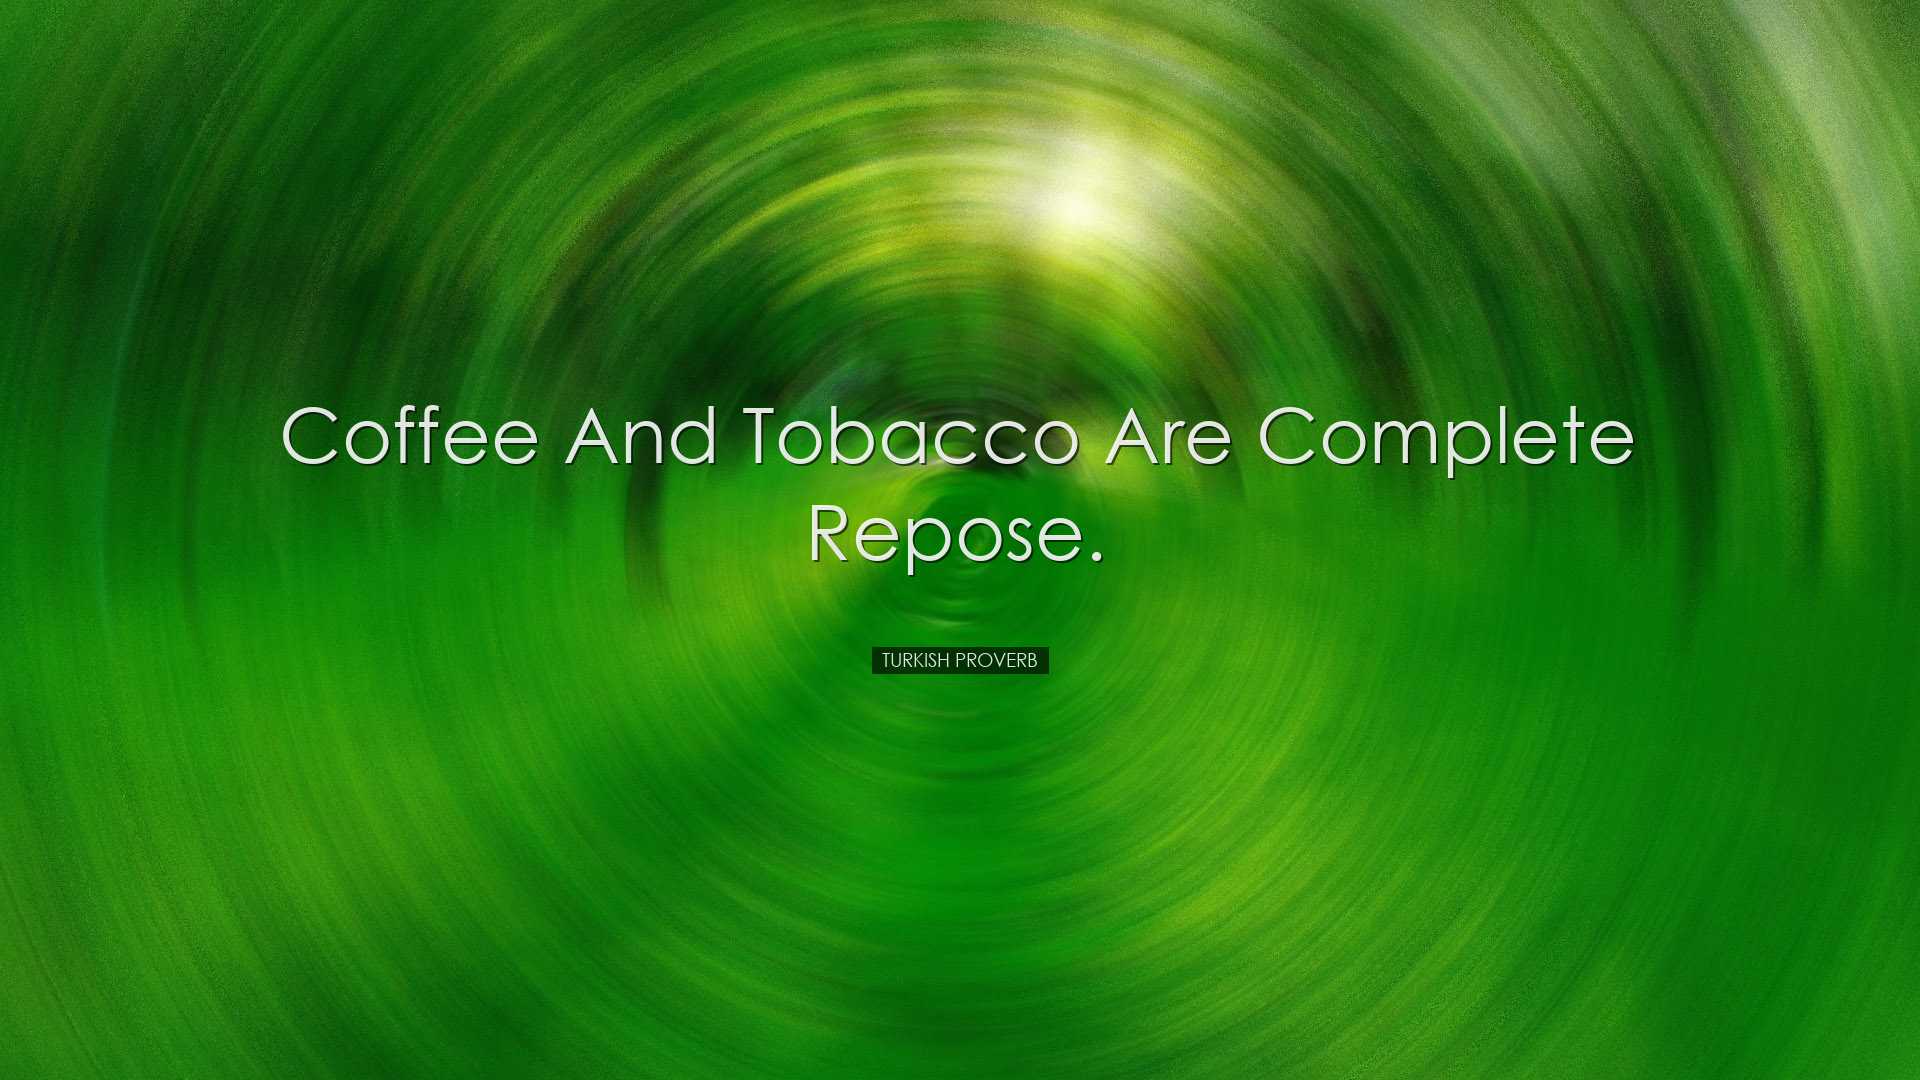 Coffee and tobacco are complete repose. - Turkish Proverb